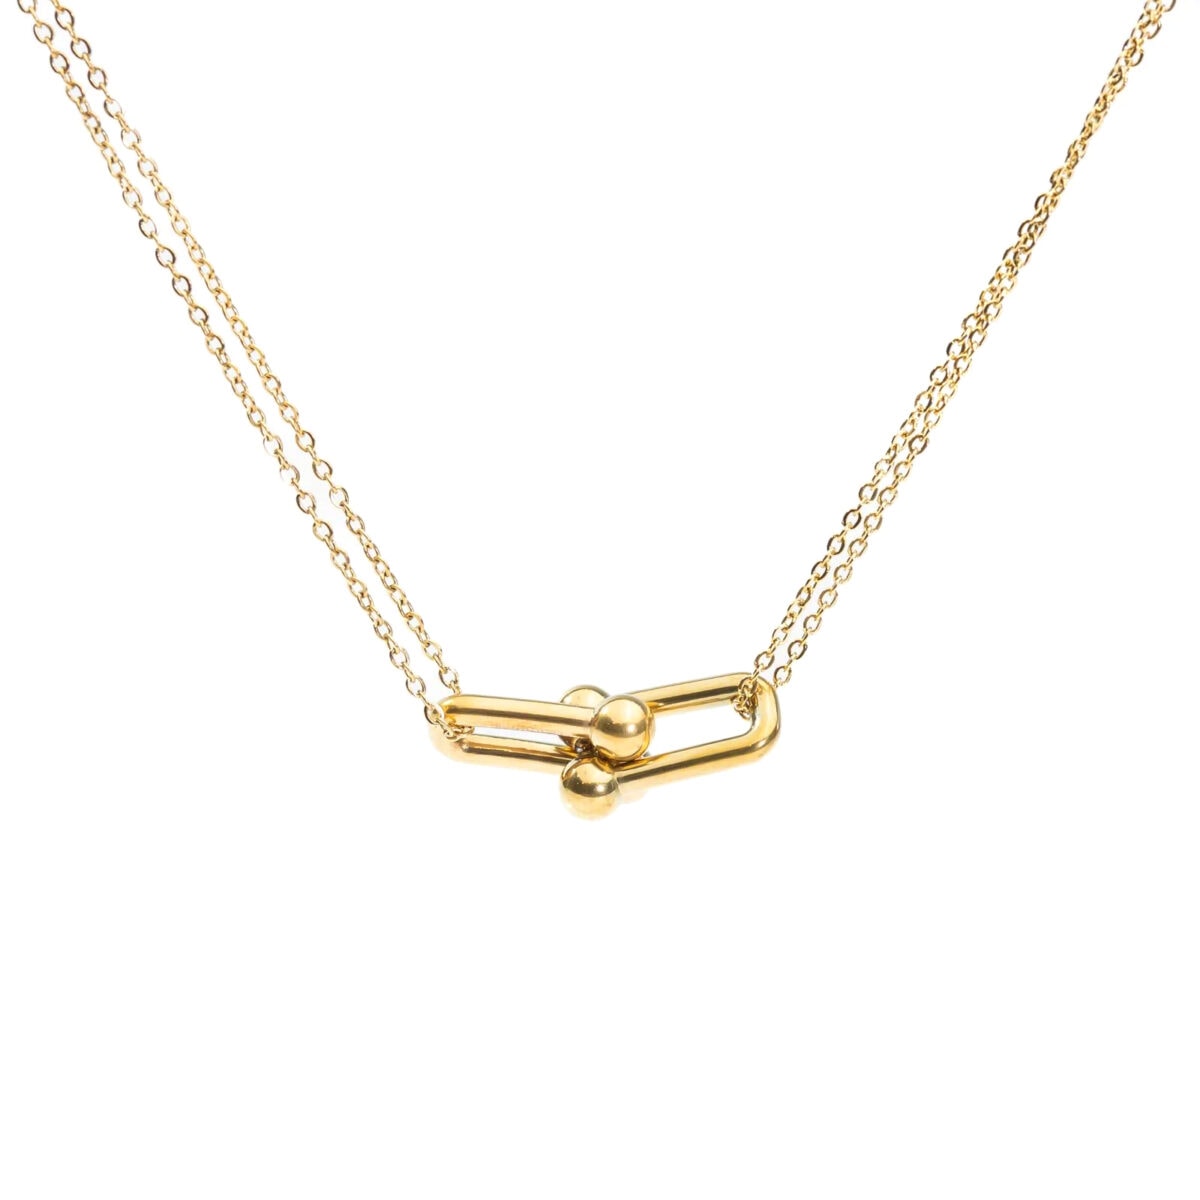 https://m.clubbella.co/product/bold-gold-link-necklace/ Bold Gold Link Necklace (2)